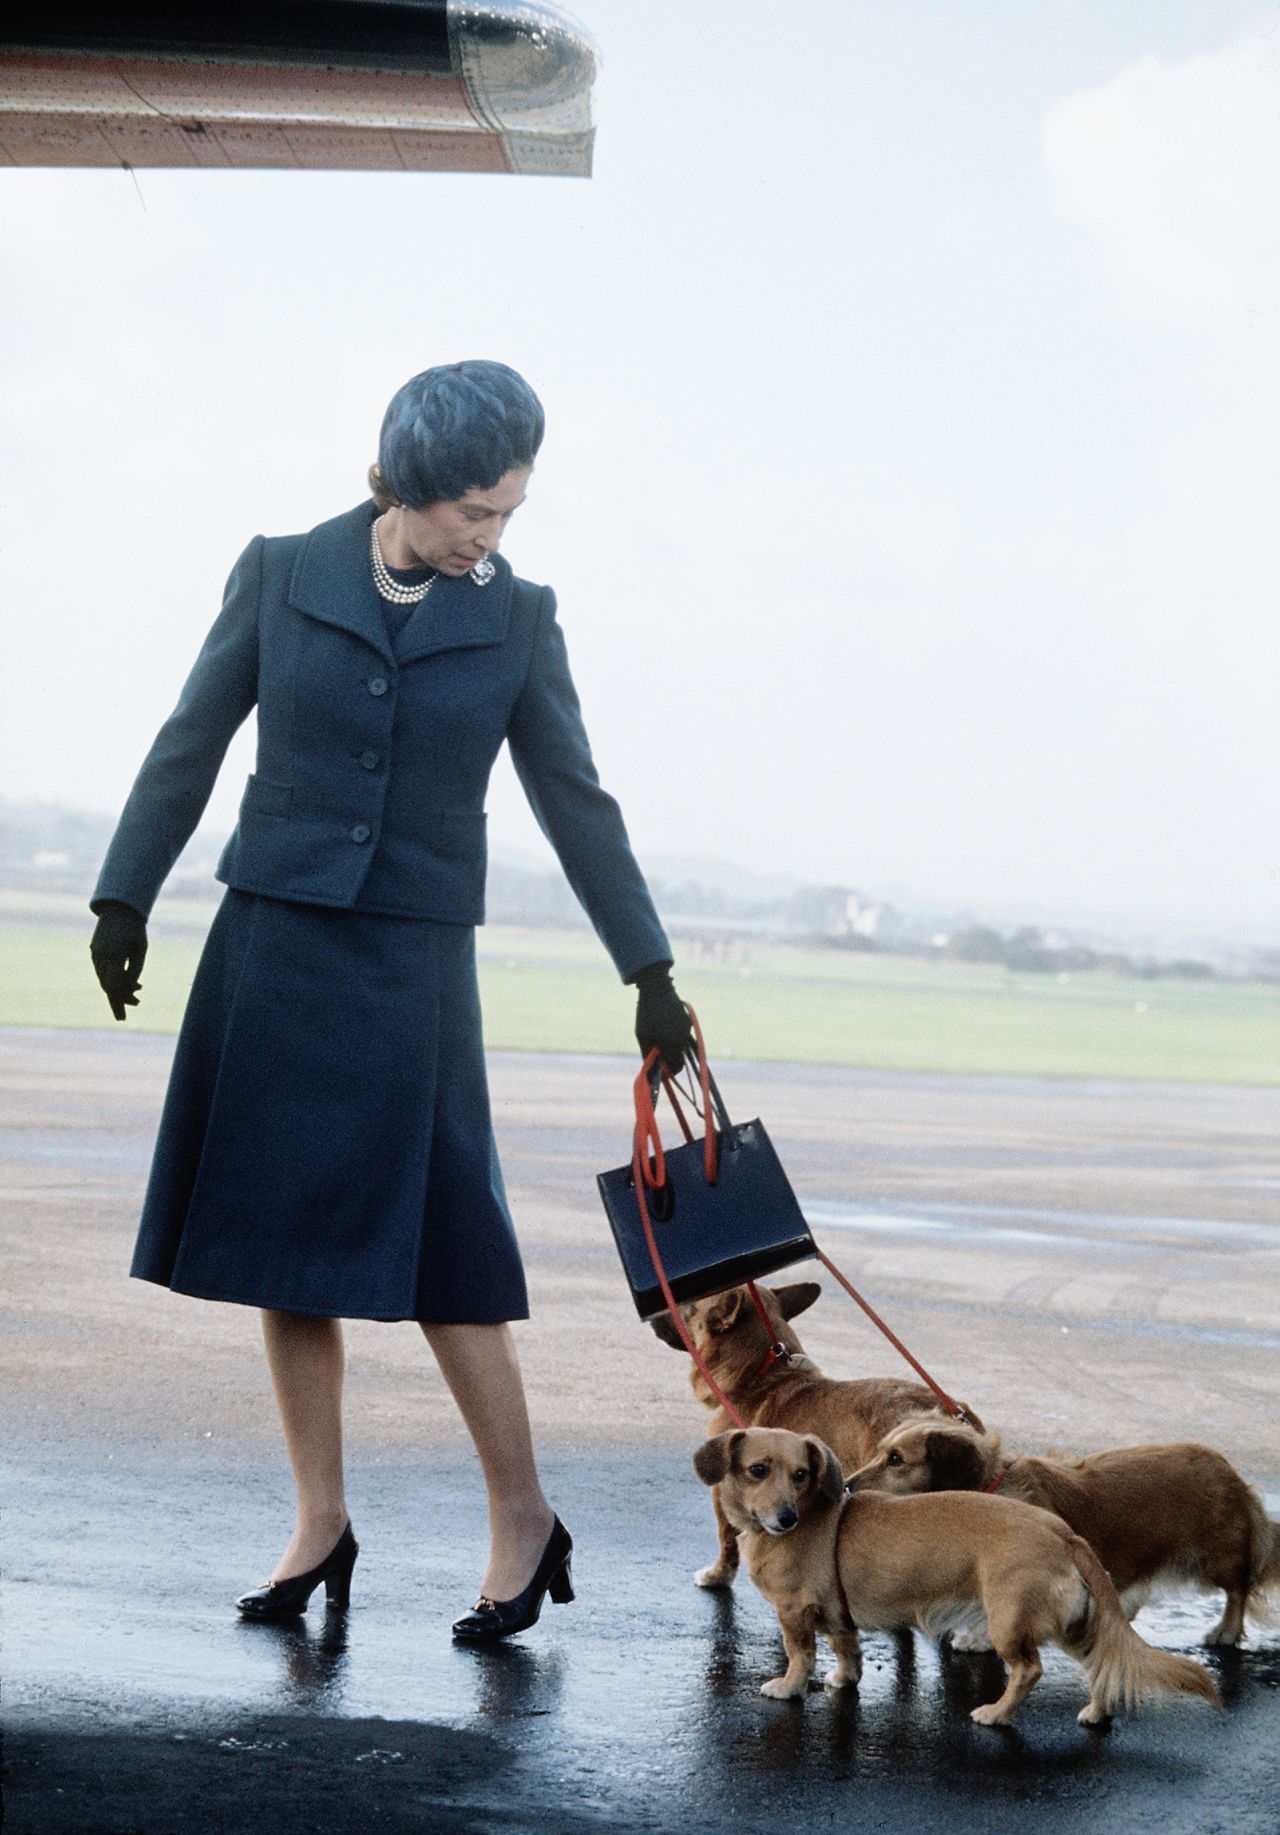 Her Majesty carrying her trusty Launer handbag while visiting Balmoral, Scotland in 1974. 